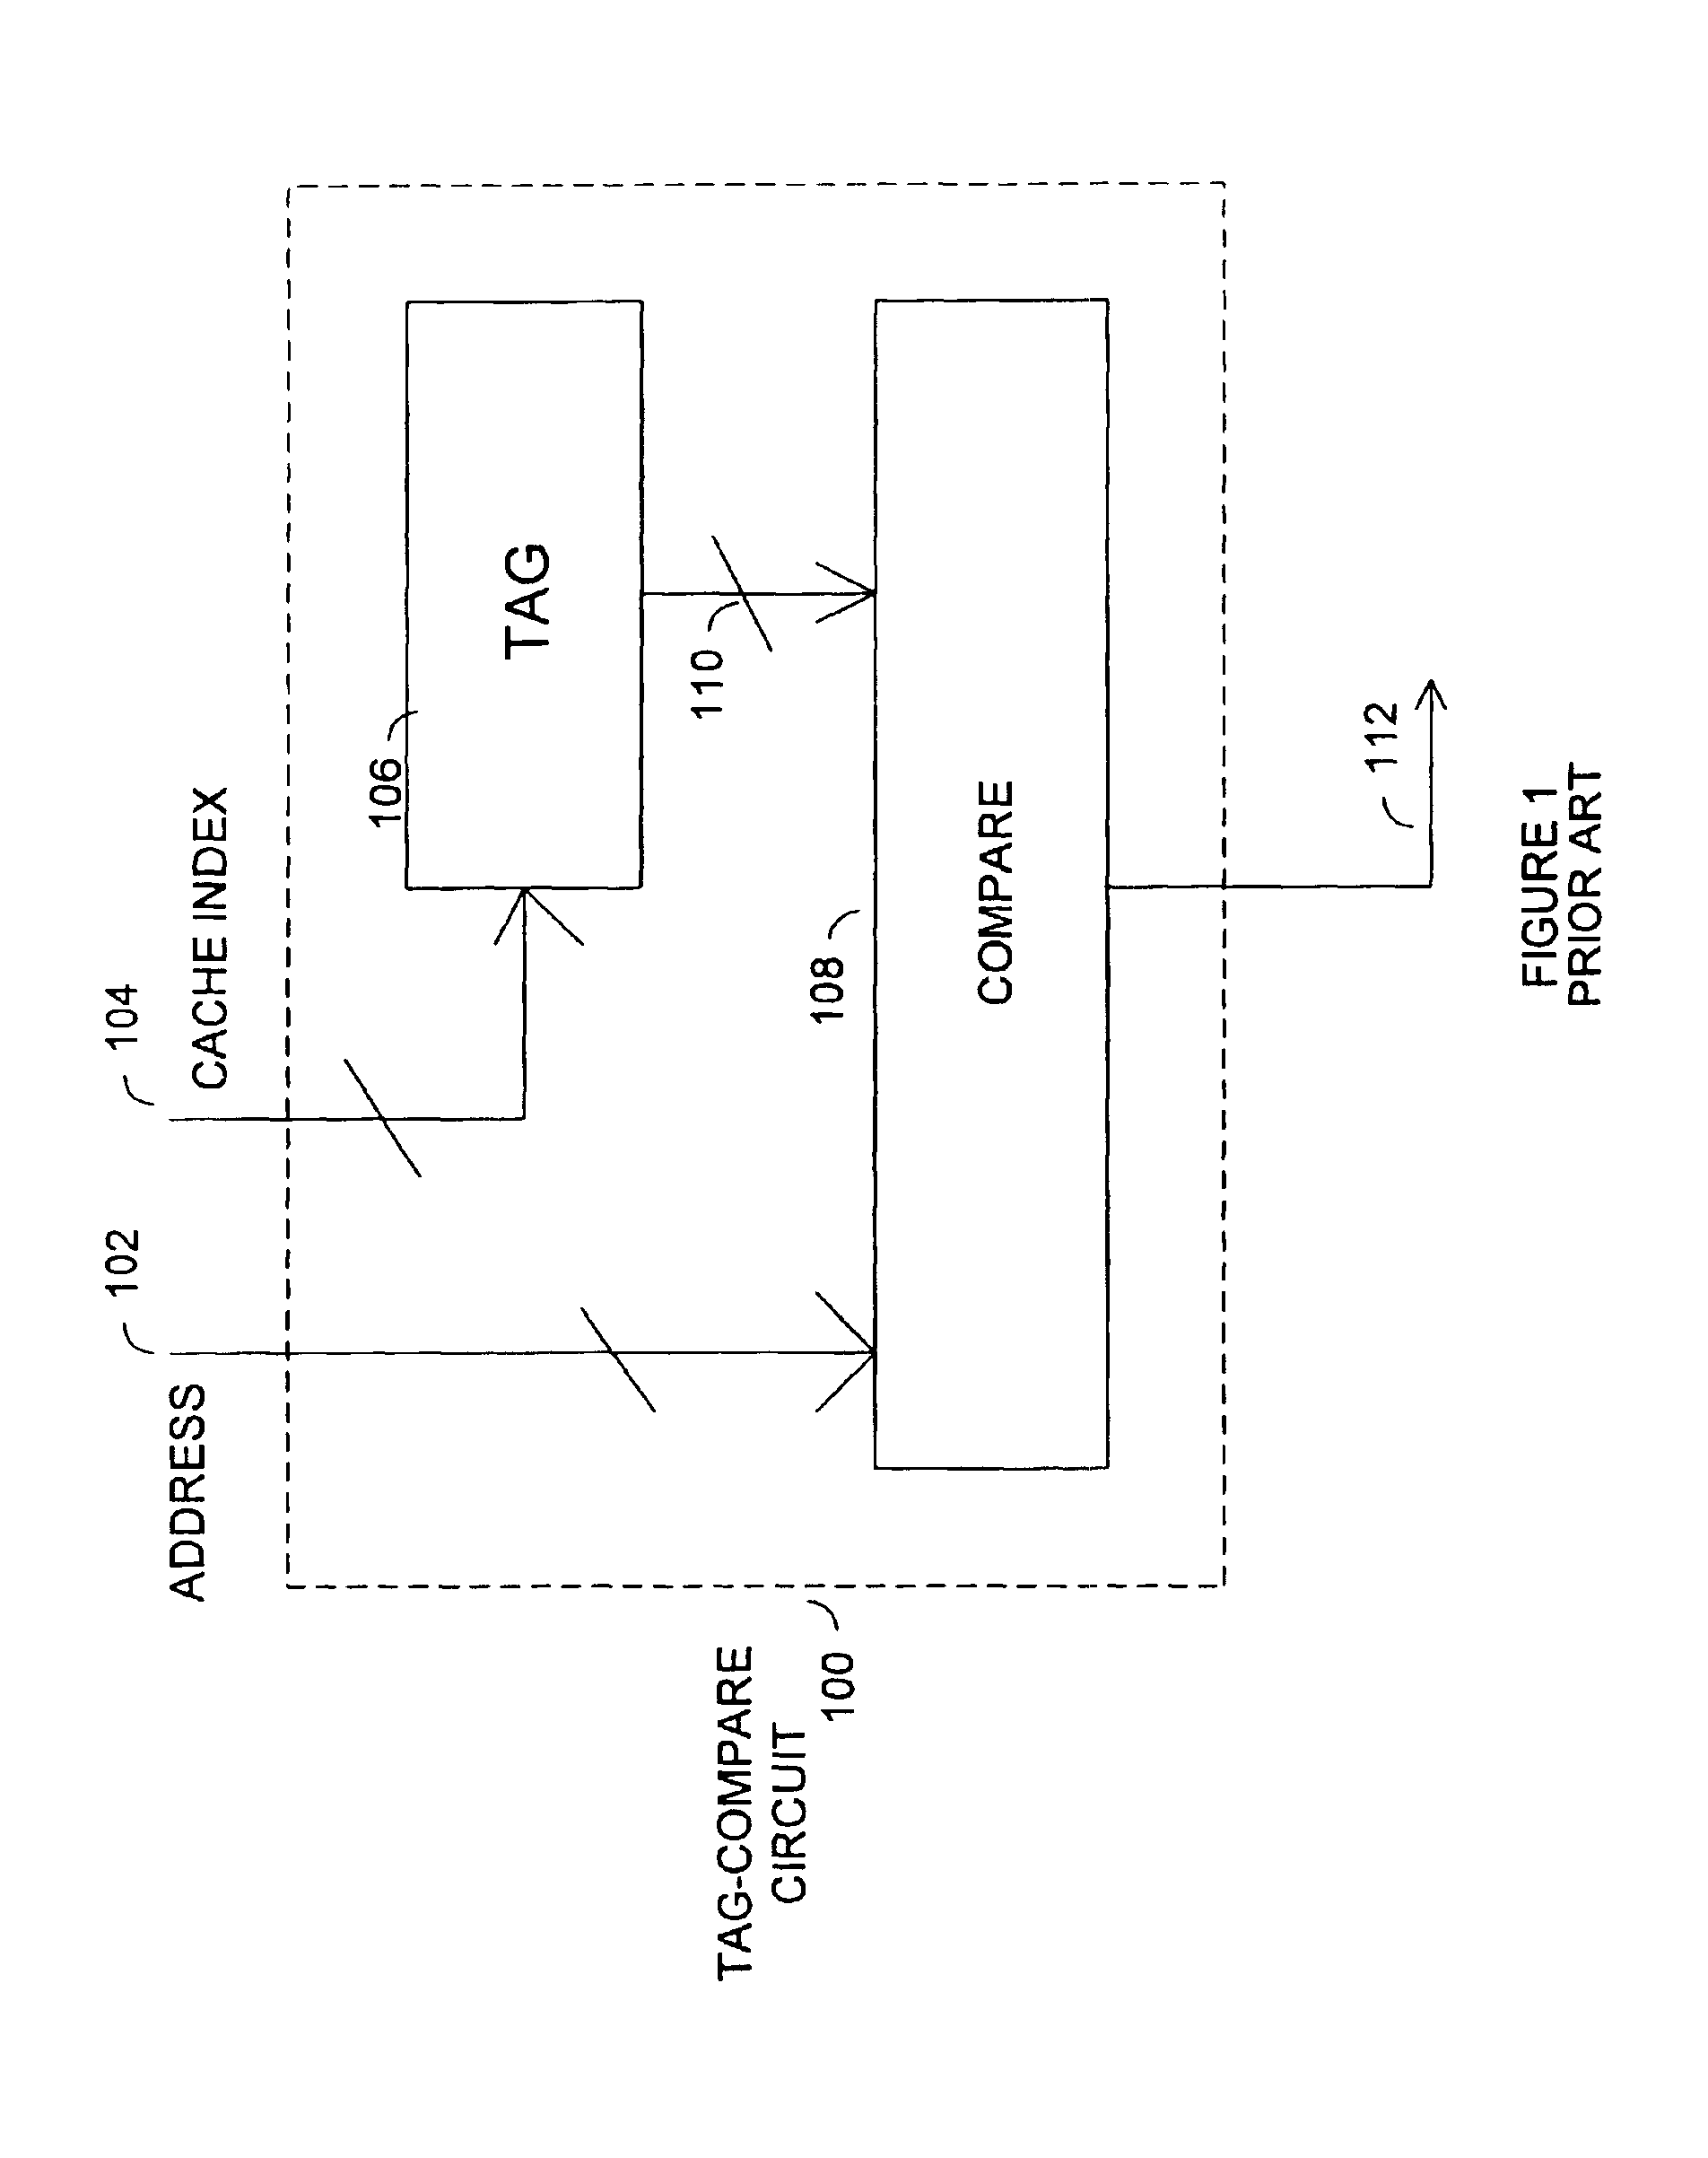 Method and apparatus for saving microprocessor power when sequentially accessing the microprocessor's instruction cache